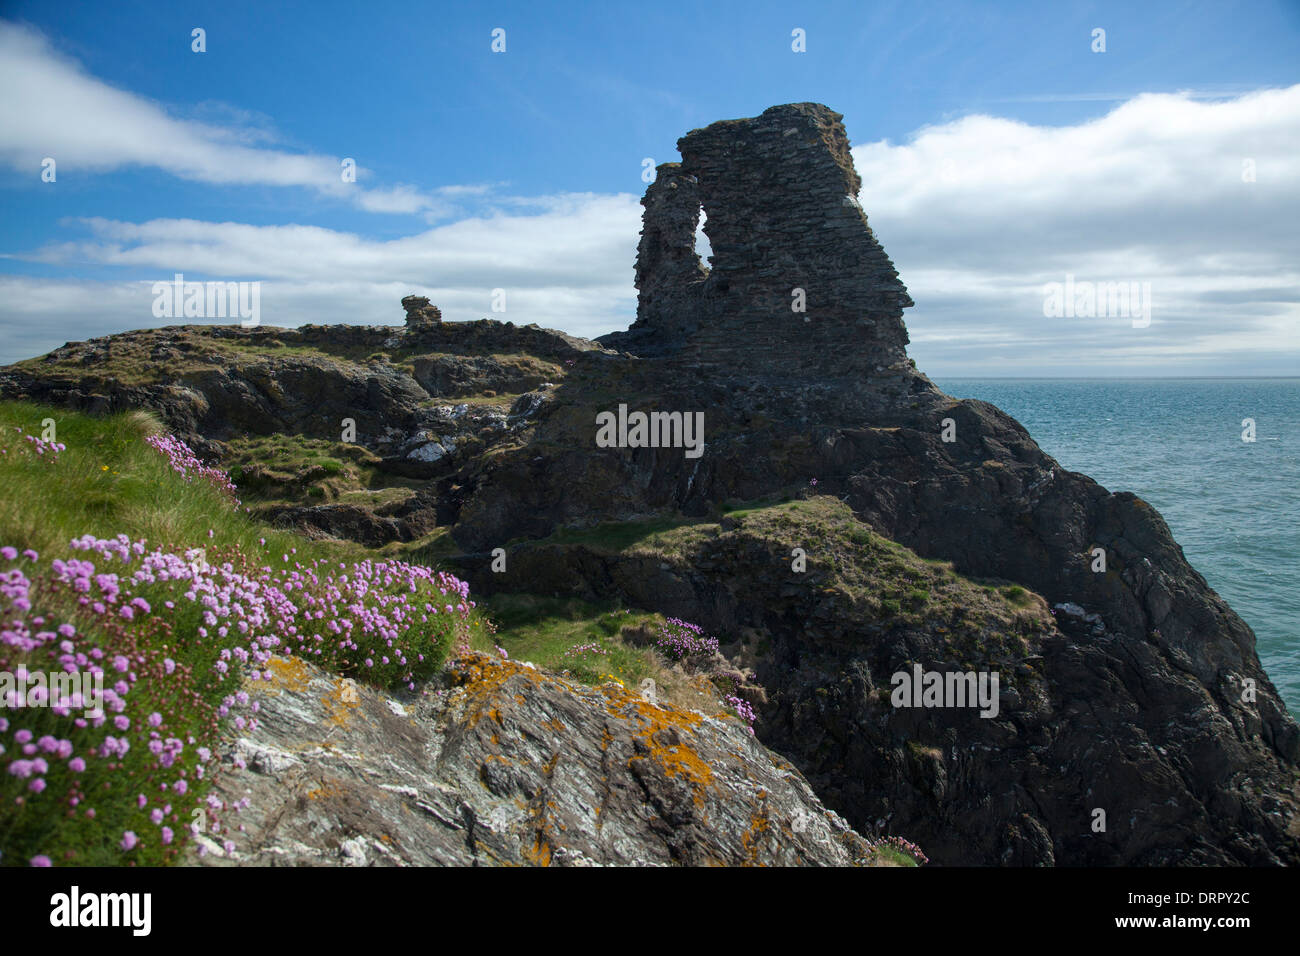 Thrift growing beneath the Black Castle, Wicklow Town, County Wicklow, Ireland. Stock Photo